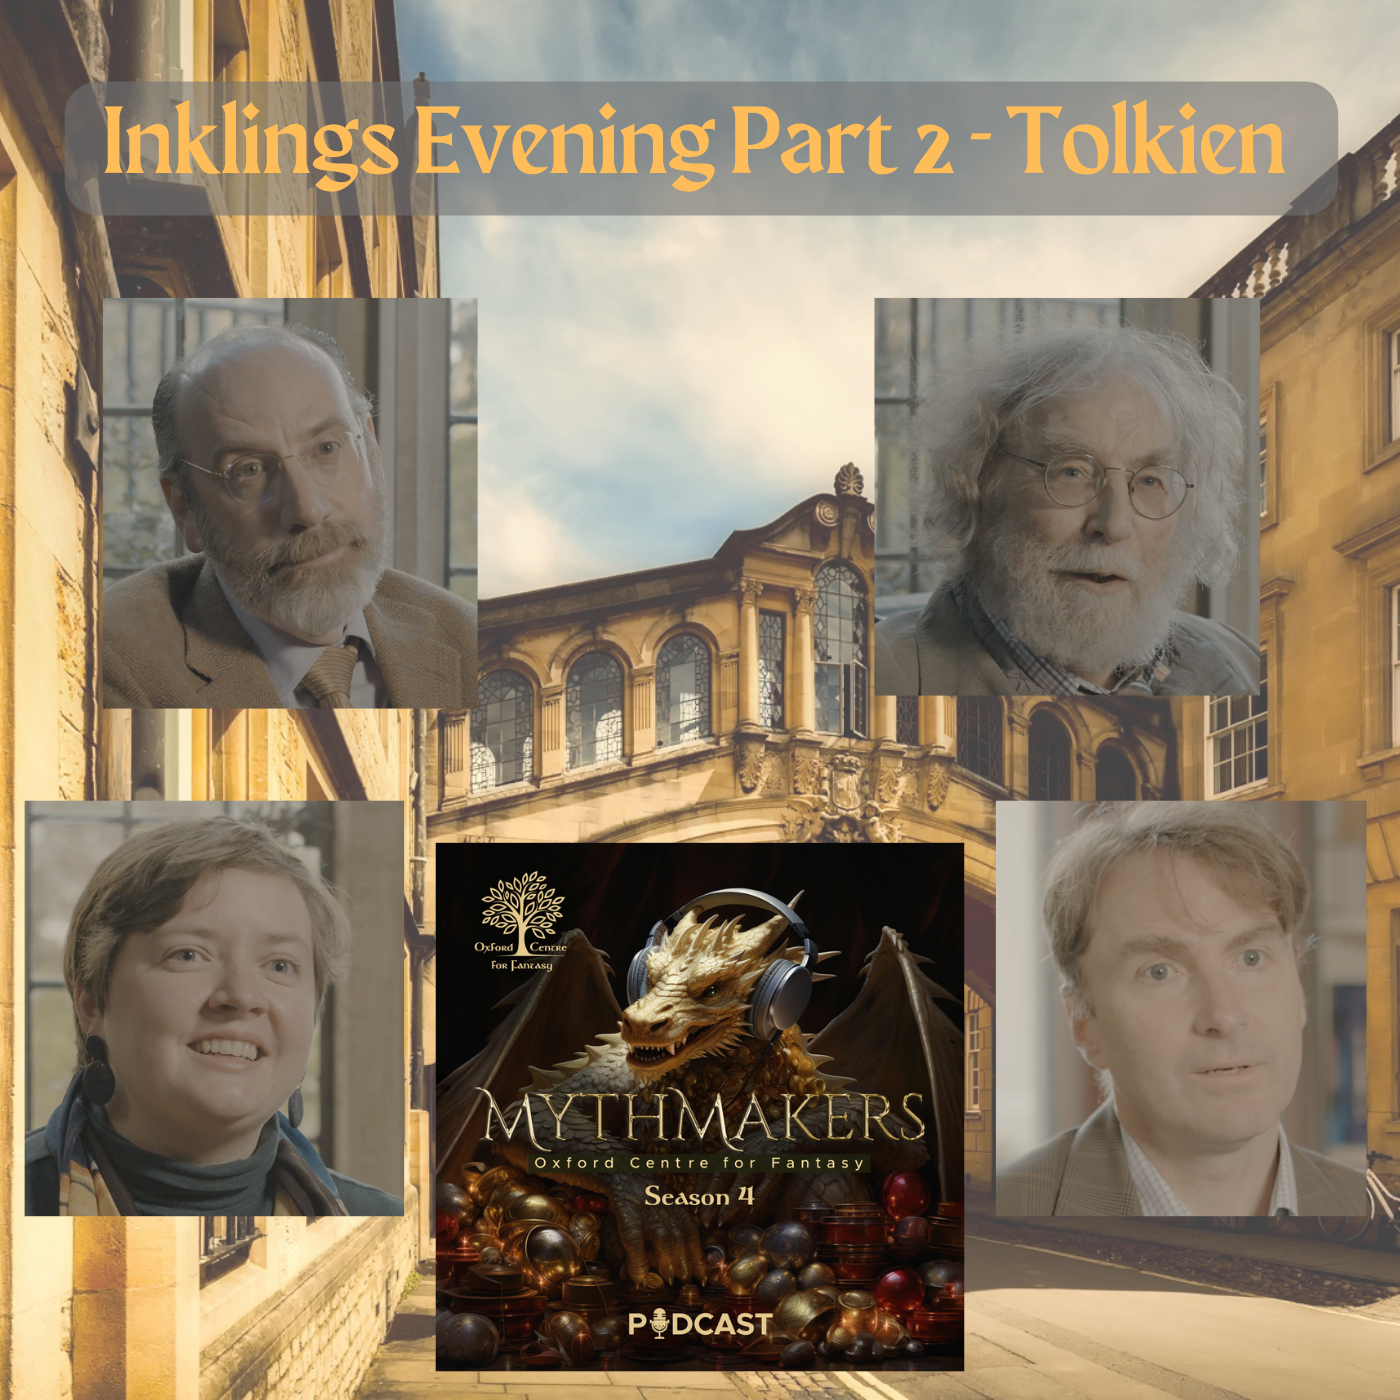 An Evening with the Inklings - JRR Tolkien